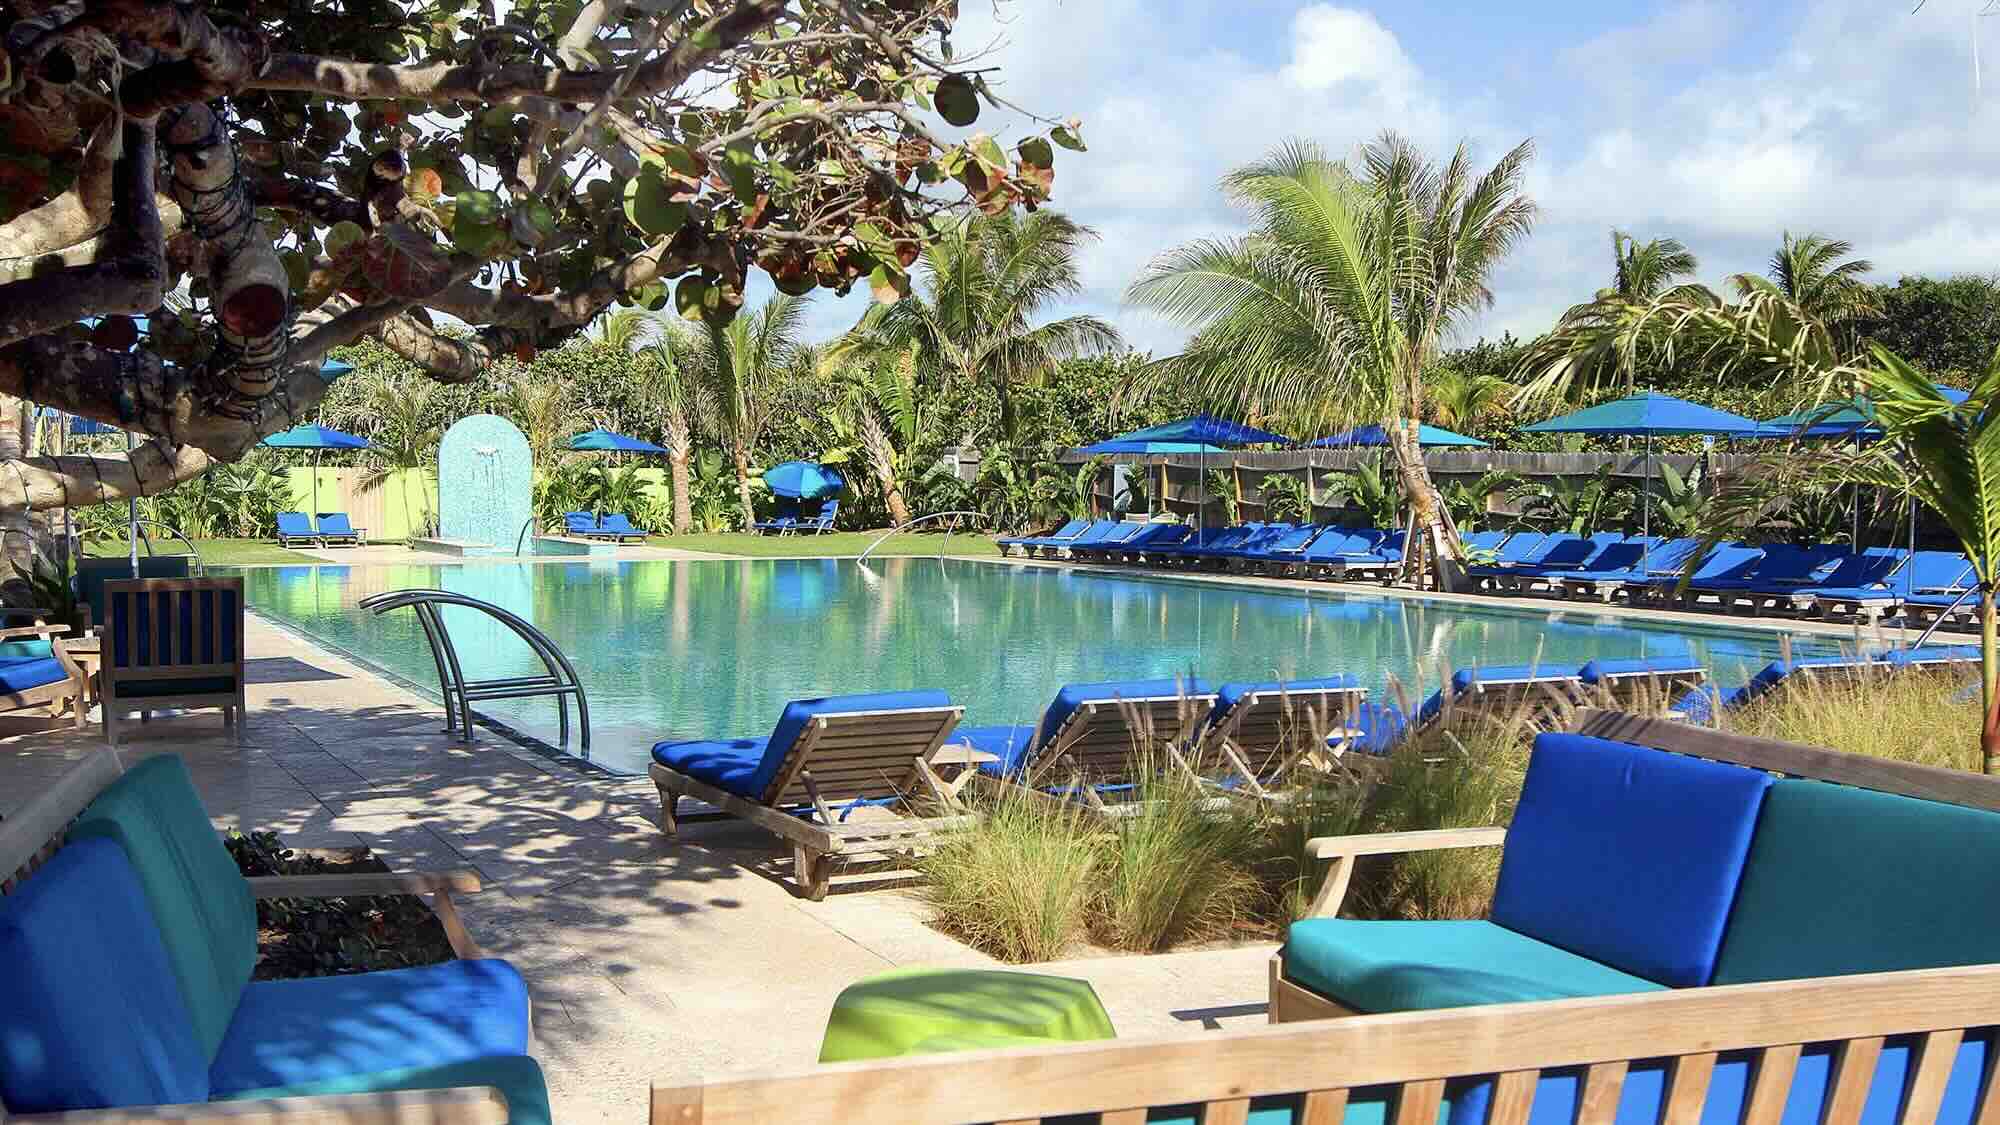 Colony Hotel & Cabana Club is one of the best luxury hotels in Delray Beach Florida